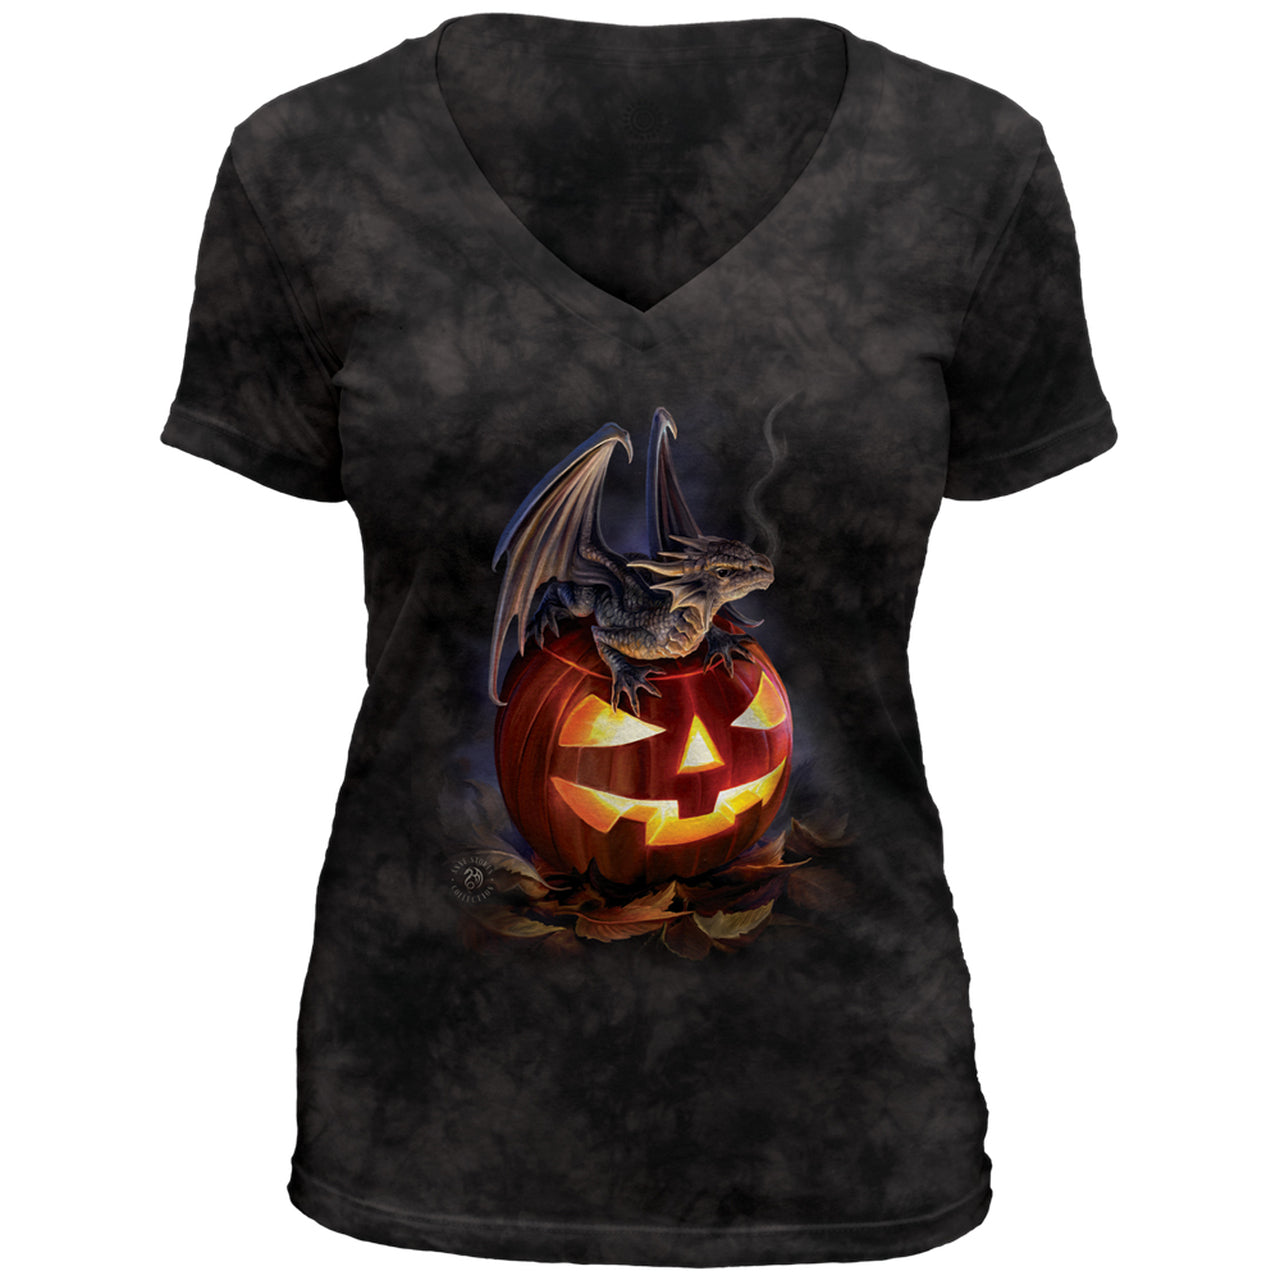 Trick or Treat by Anne Stokes Women's V-Neck Tri-blend Tee